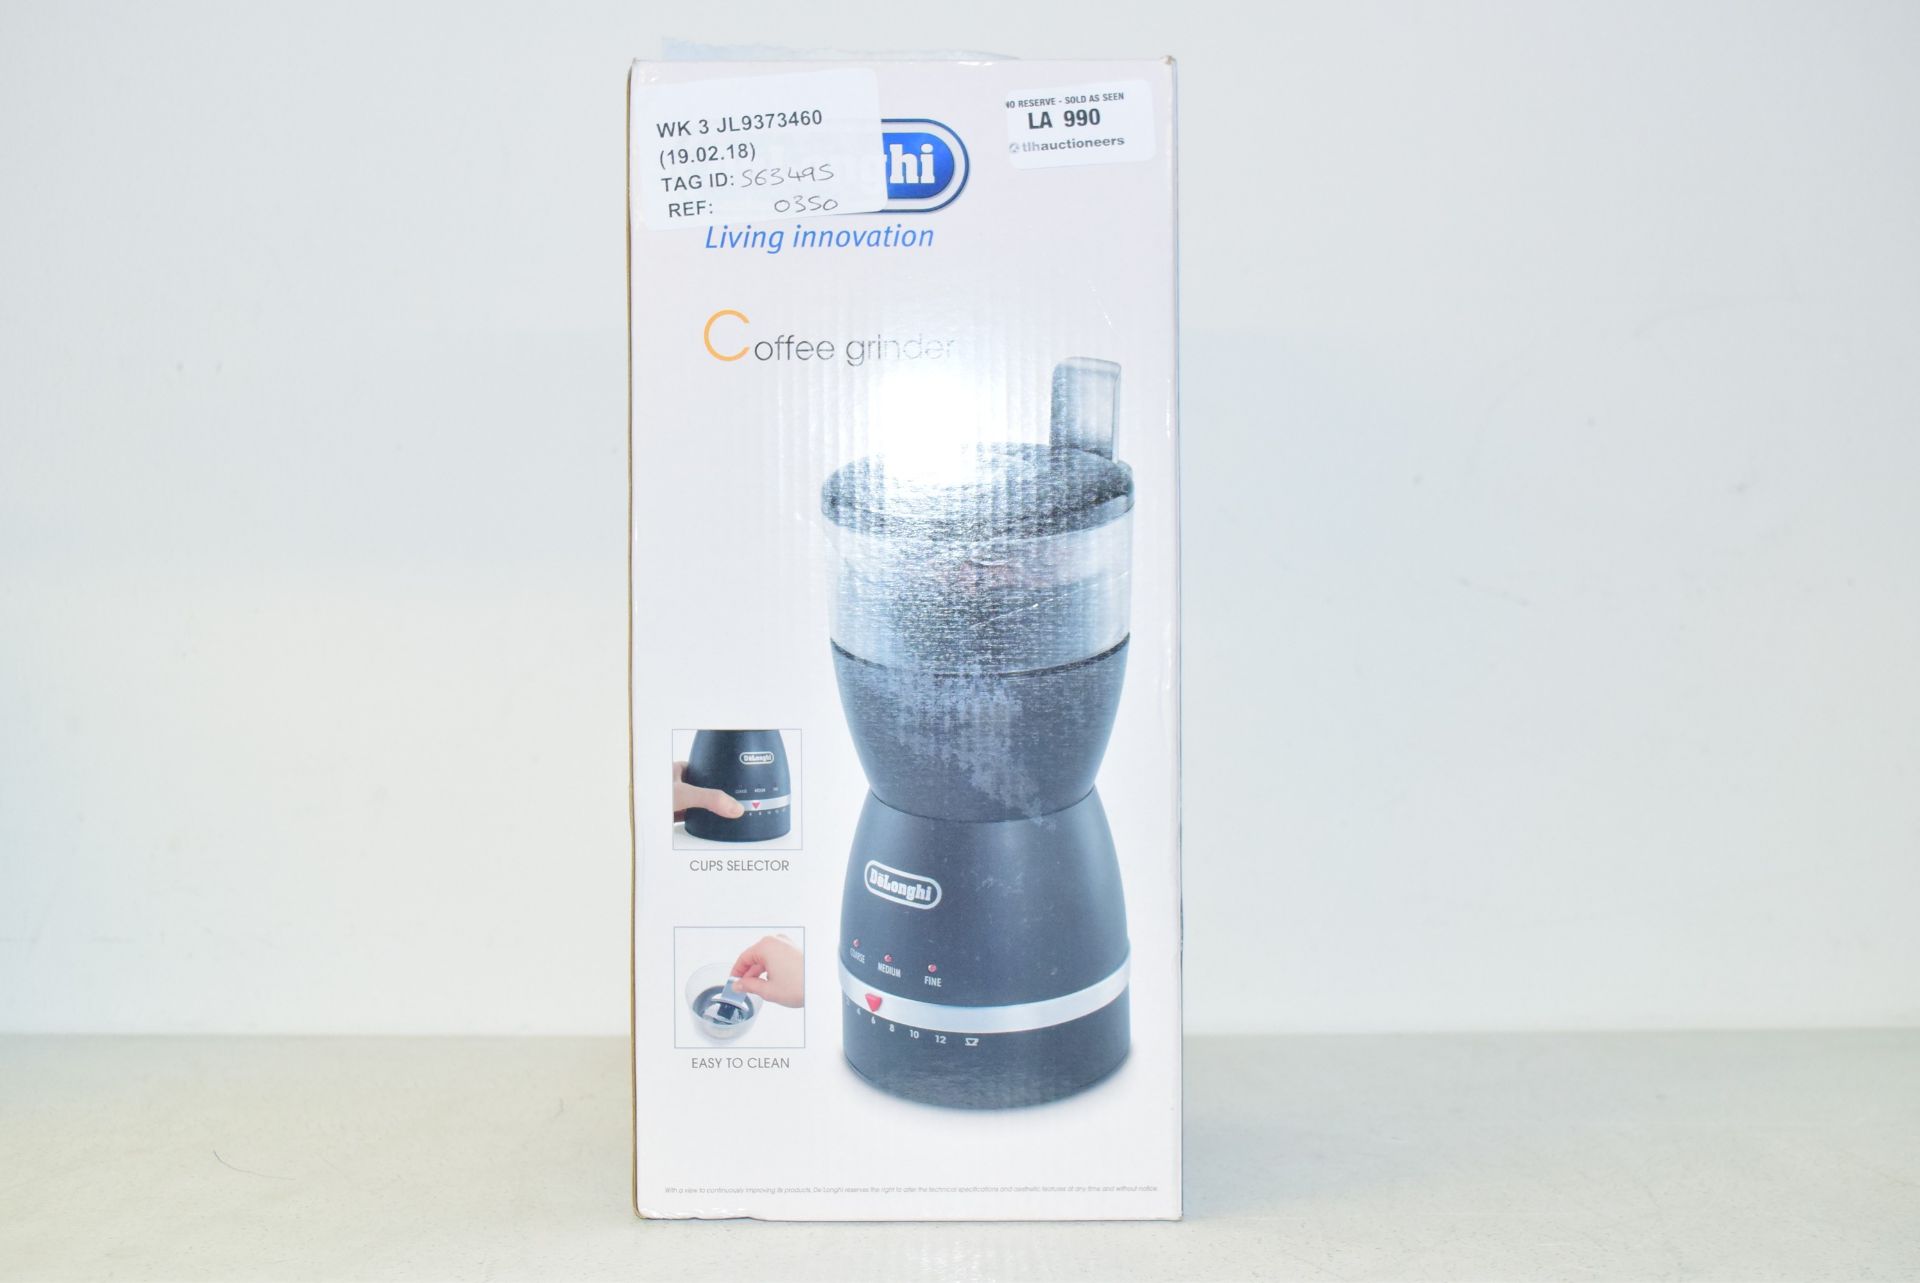 1 X BOXED DELONGHI COFFEE GRINDER RRP £35 19.02.18 563495 W990